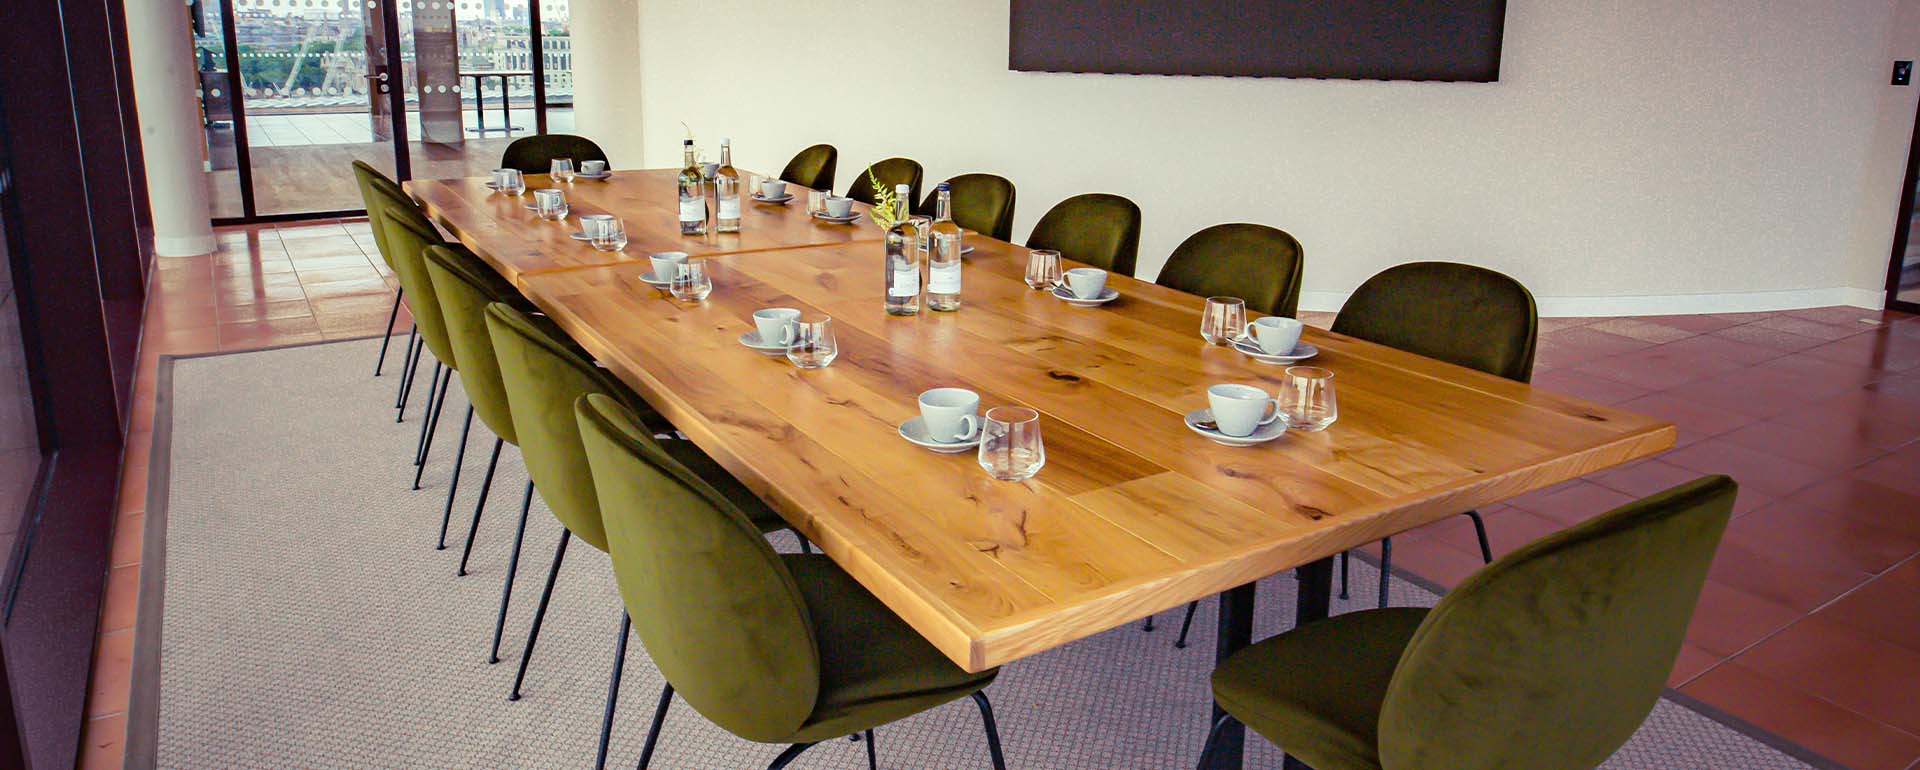 Long meeting table at Rose Court